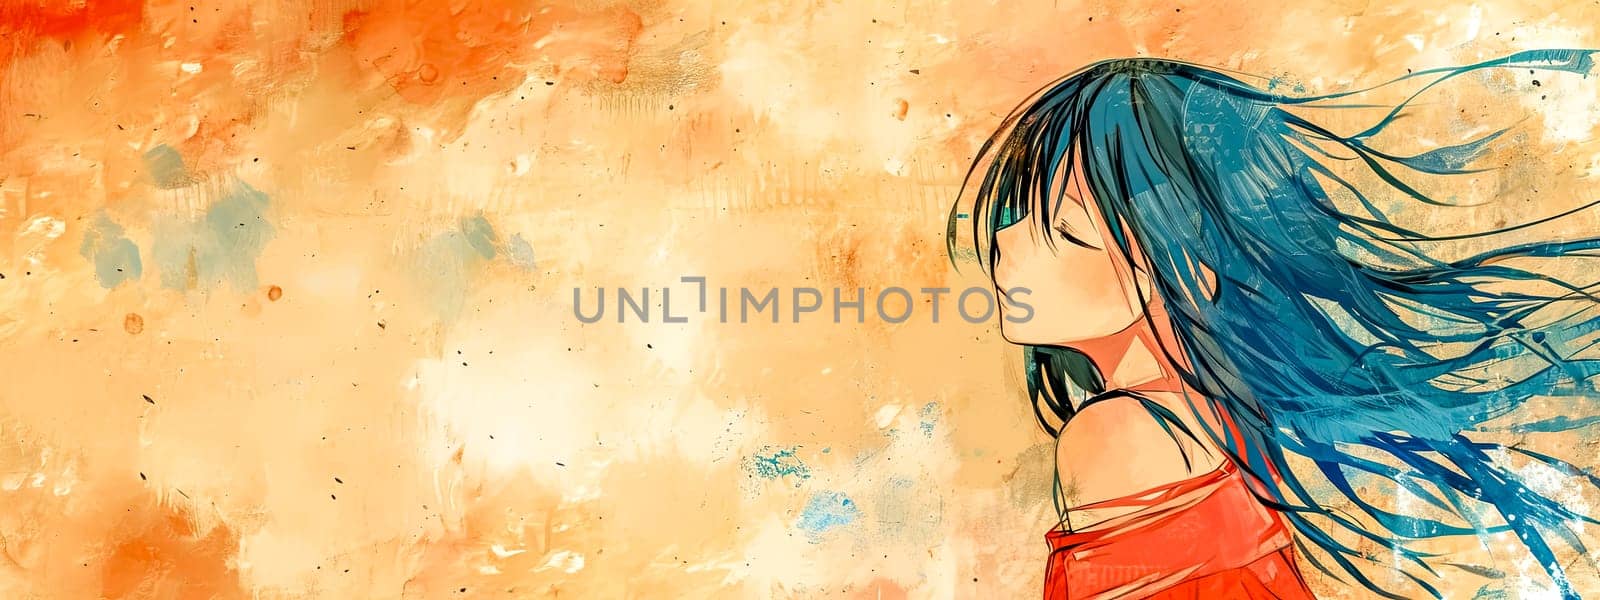 anime girl with flowing blue hair against an abstract orange textured background, invoking a sense of serenity and creativity. by Edophoto